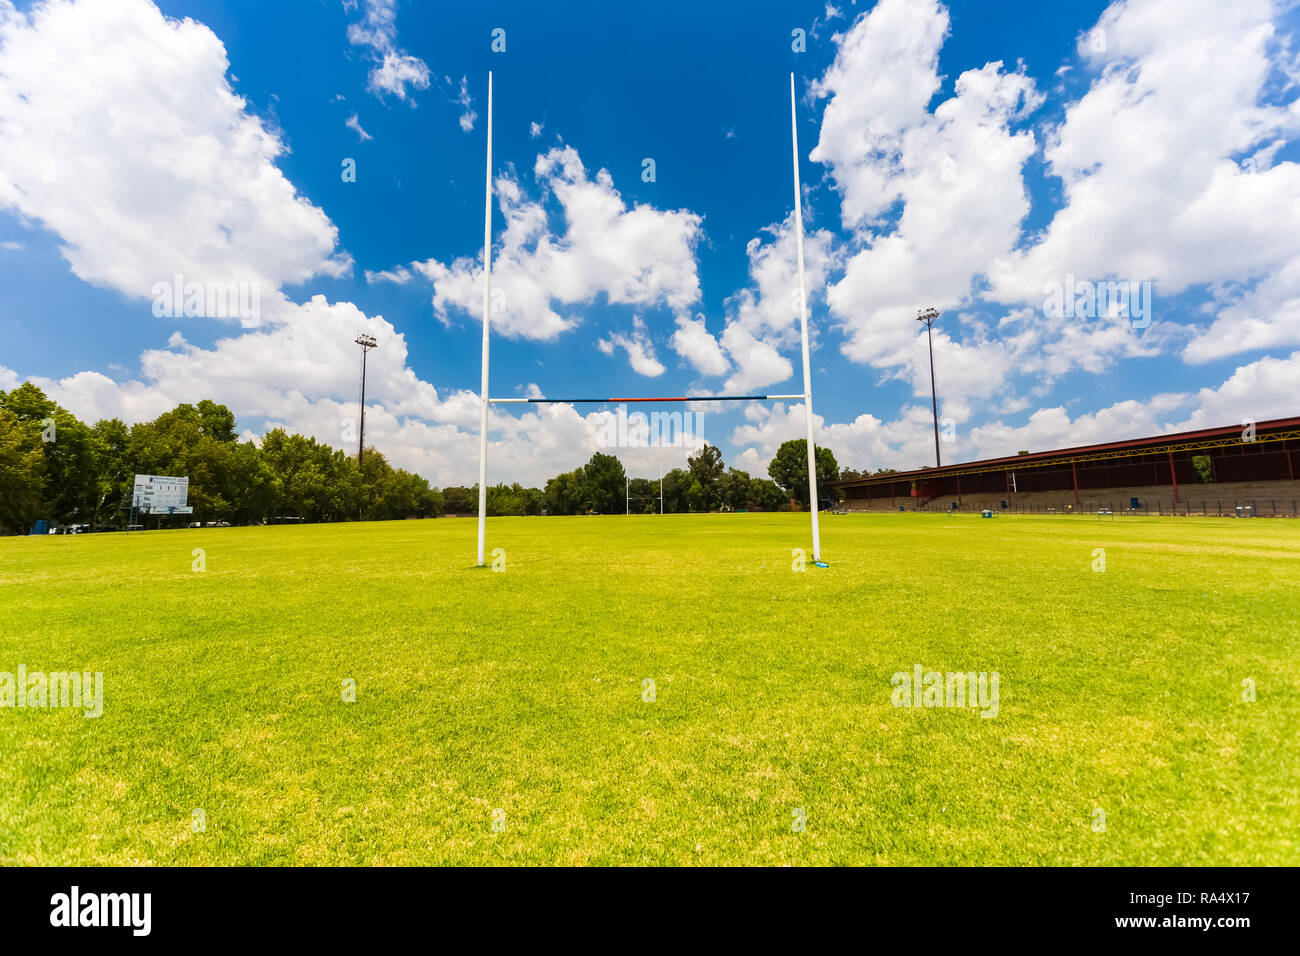 Johannesburg, South Africa - February 16 2015: Empty High School Rugby Field Stock Photo